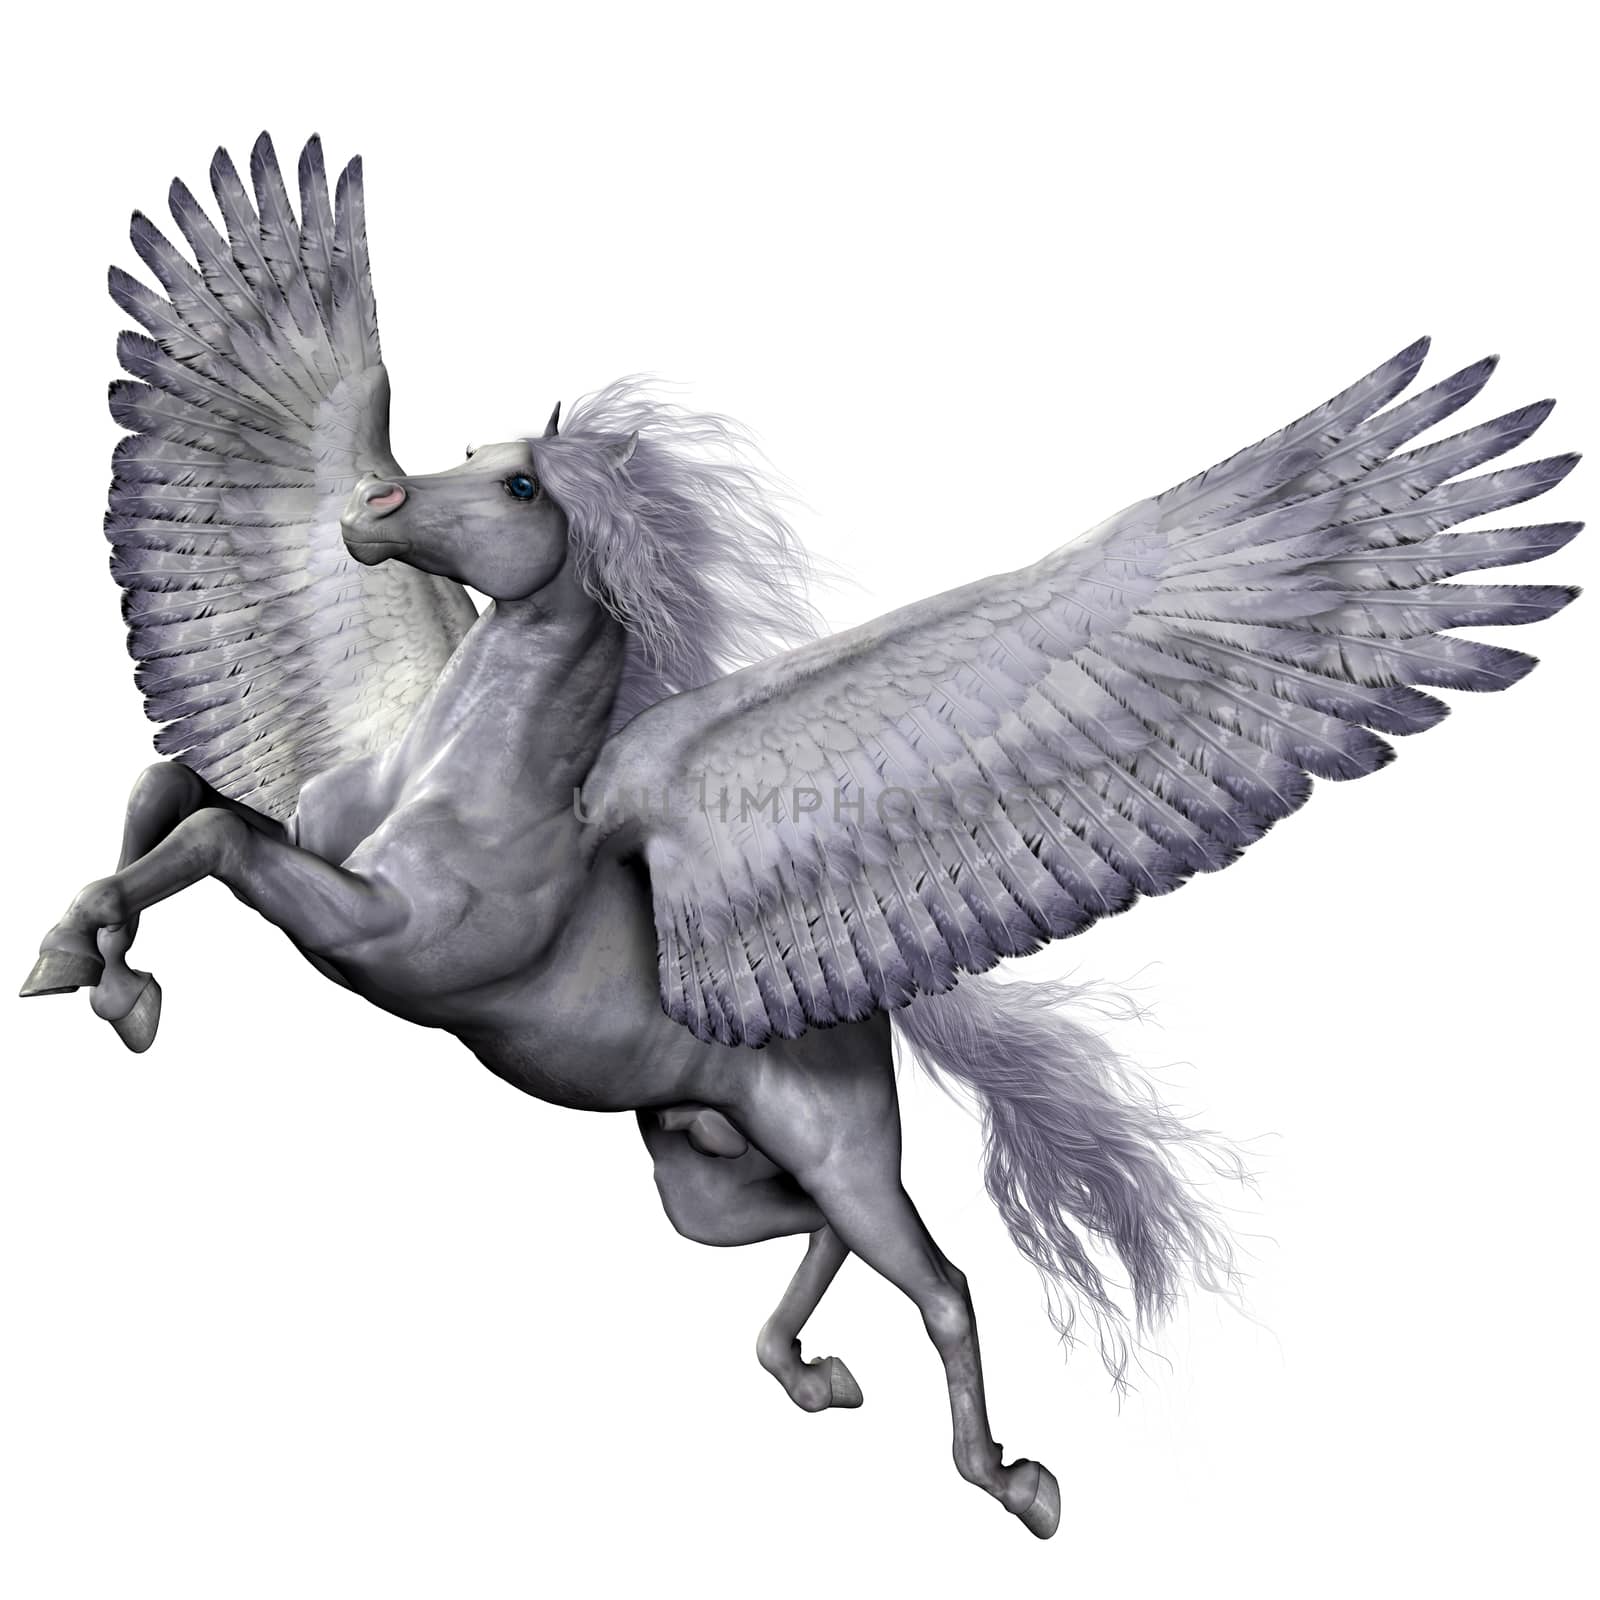 Pegasus is a winged divine stallion who was sired by the god Poseidon of folklore and legend.